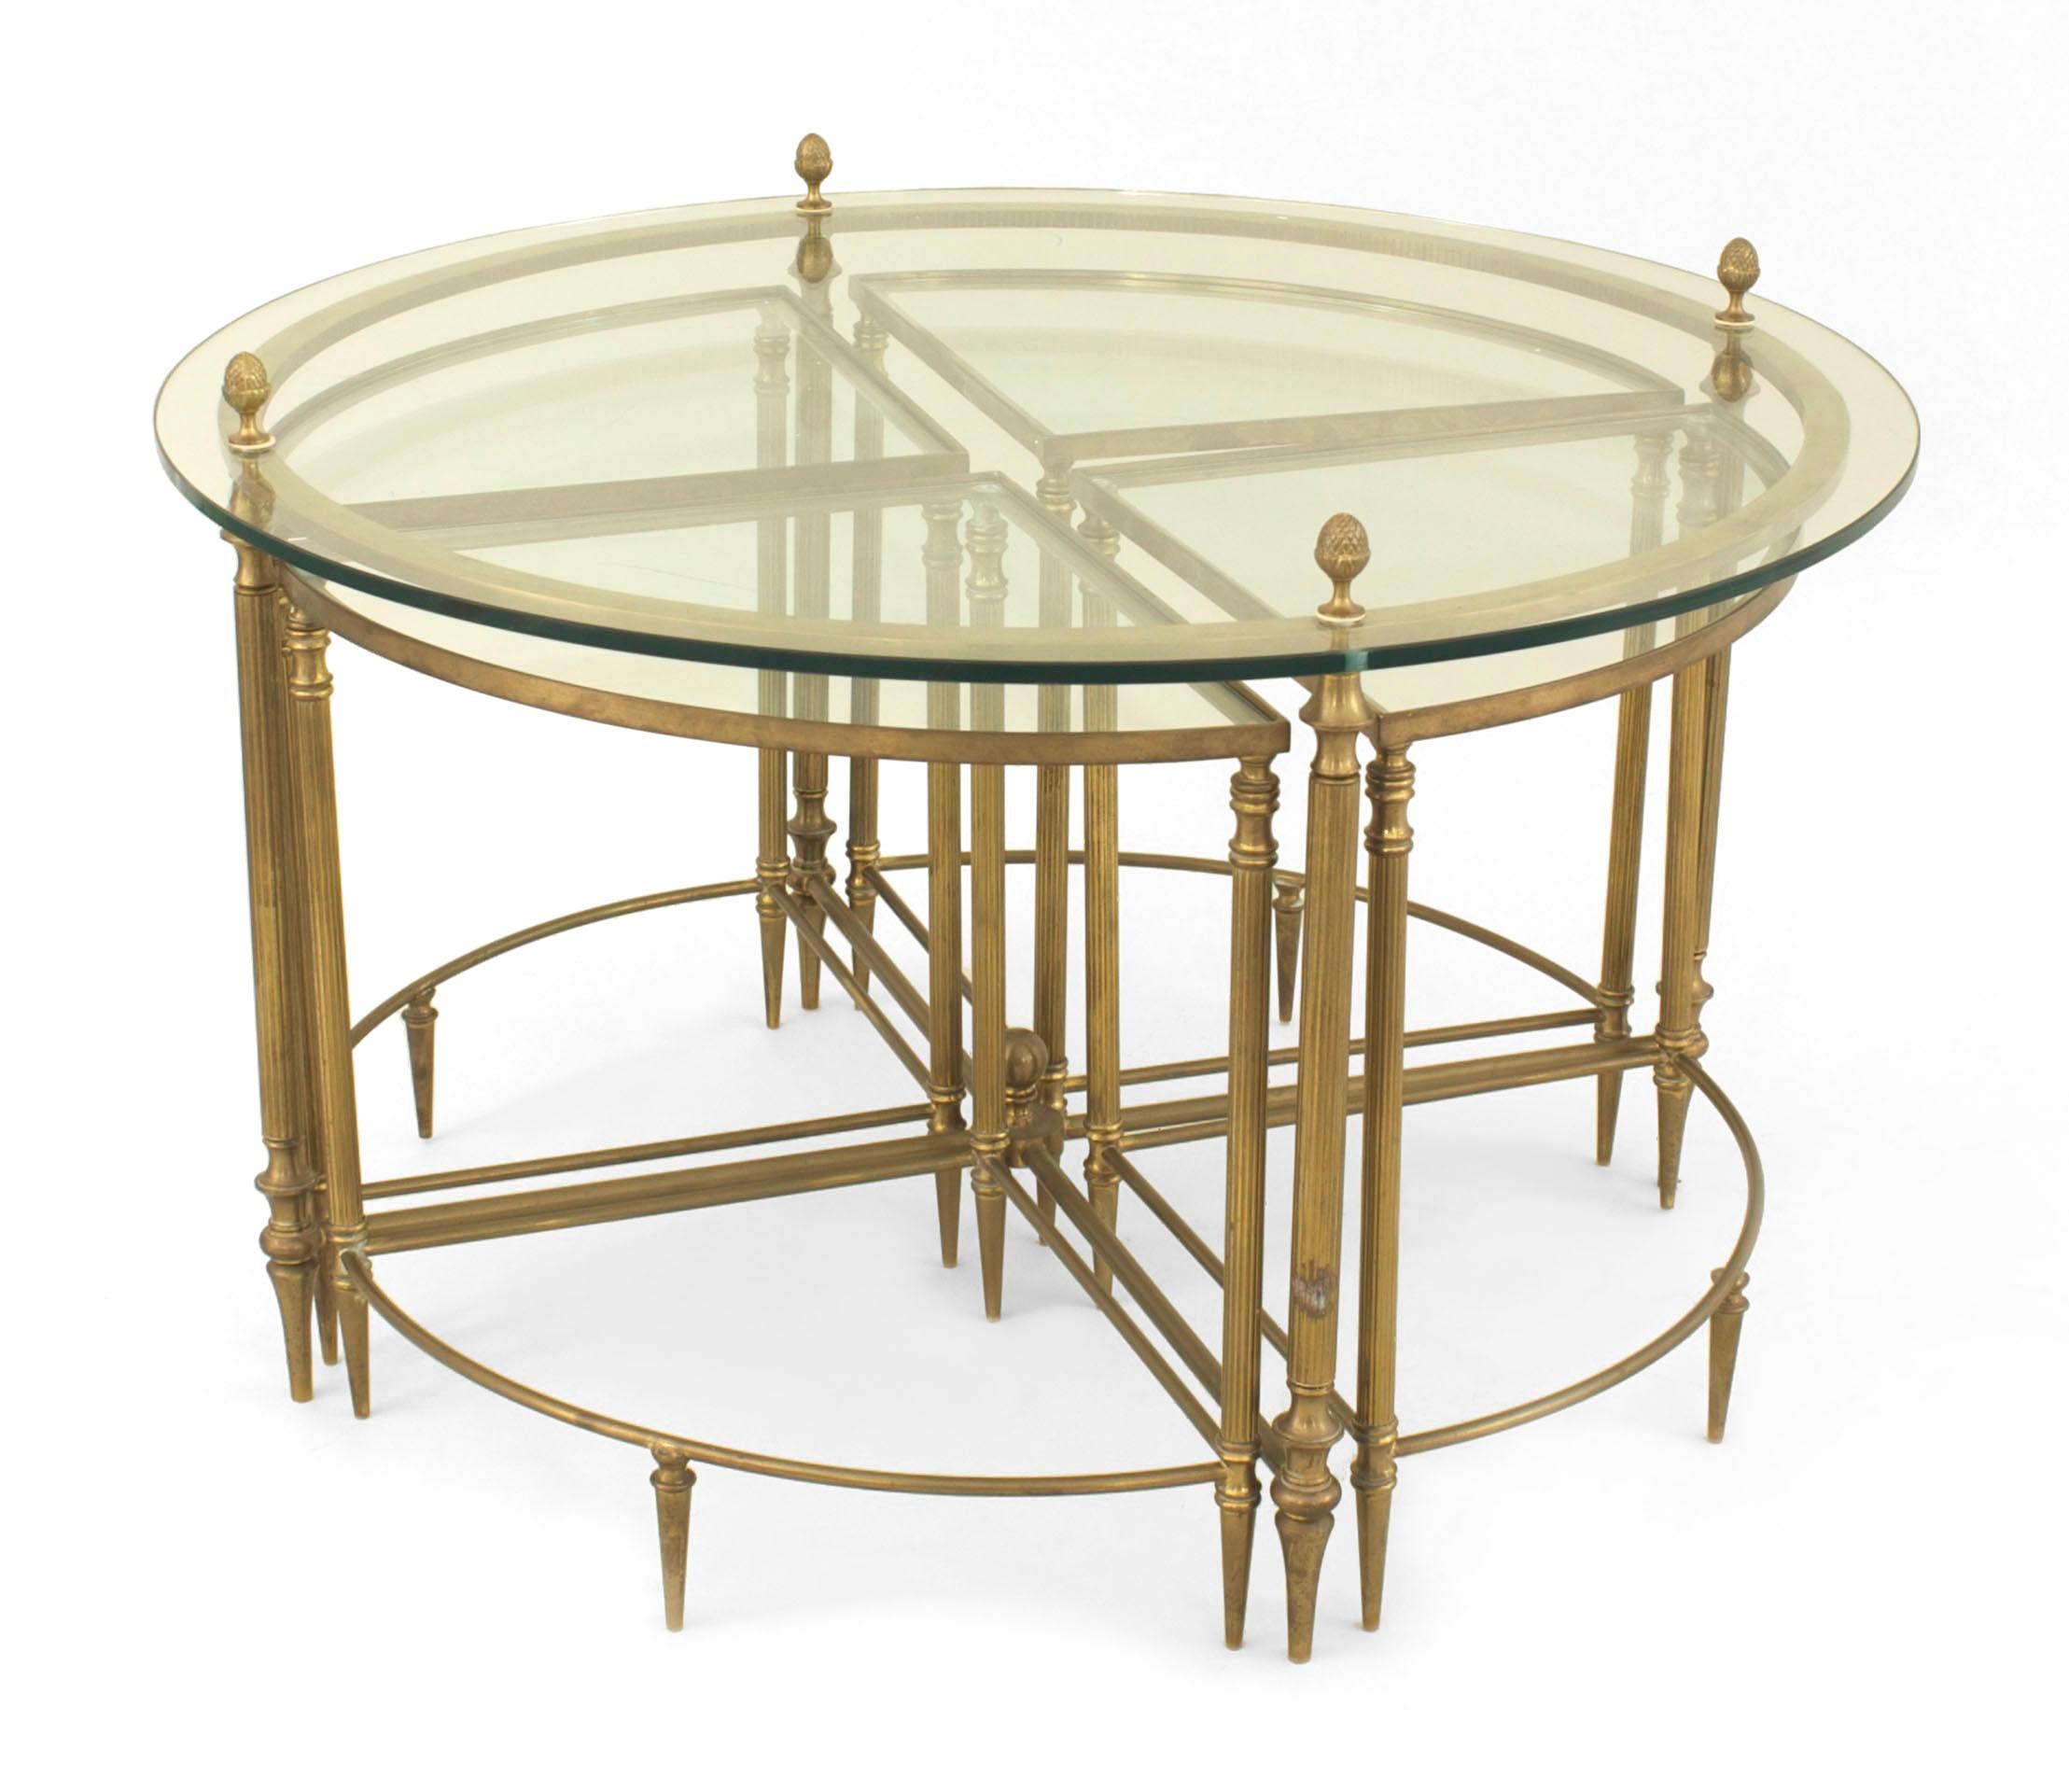 American Mid-Century brass round coffee table with a glass top with acorn finials and a lower stretcher which fits four small wedge-shaped glass top tables.
